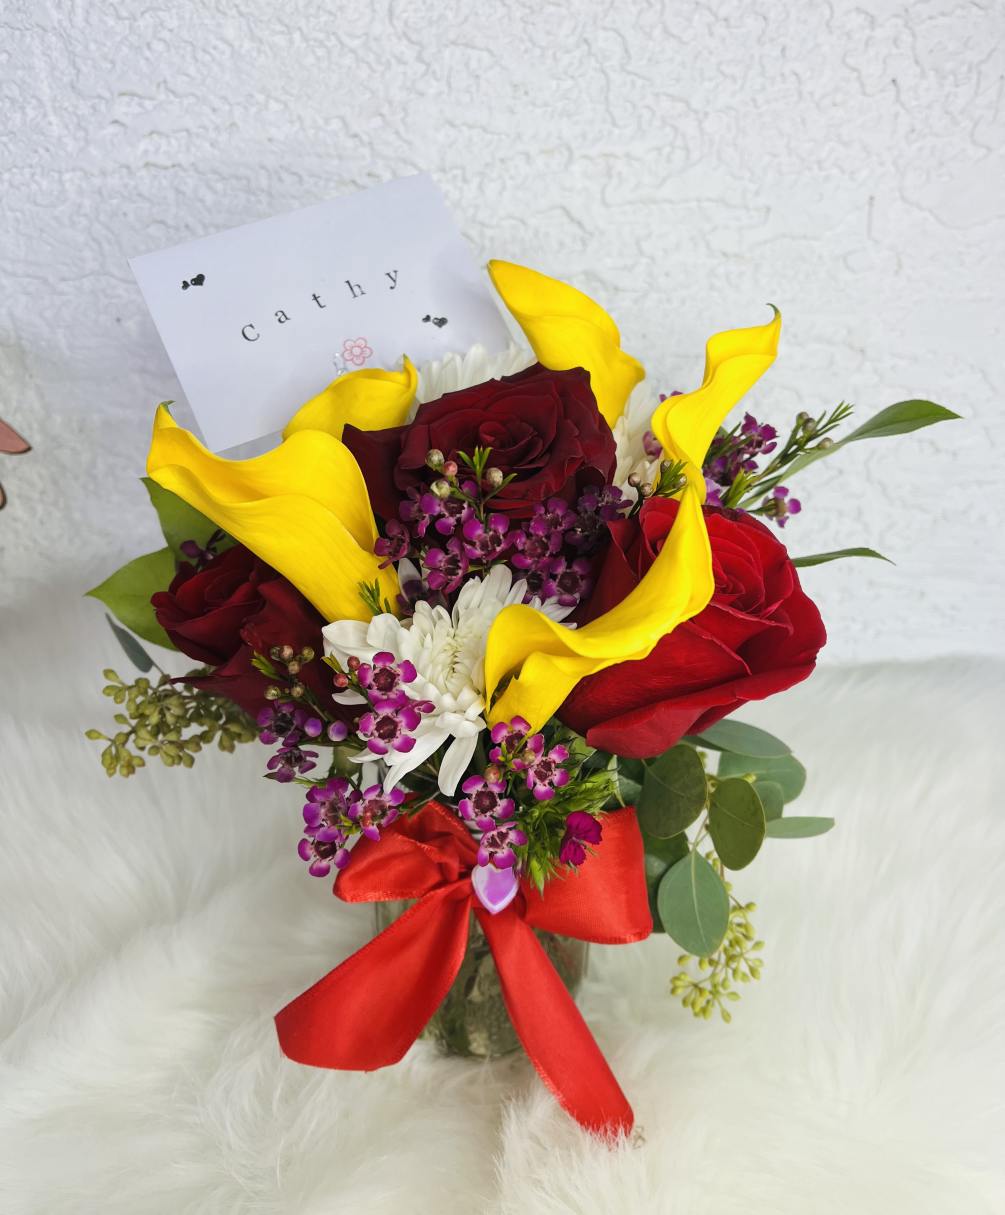 With fresh and bright seasonal flowers, a beautiful arrangement to give on